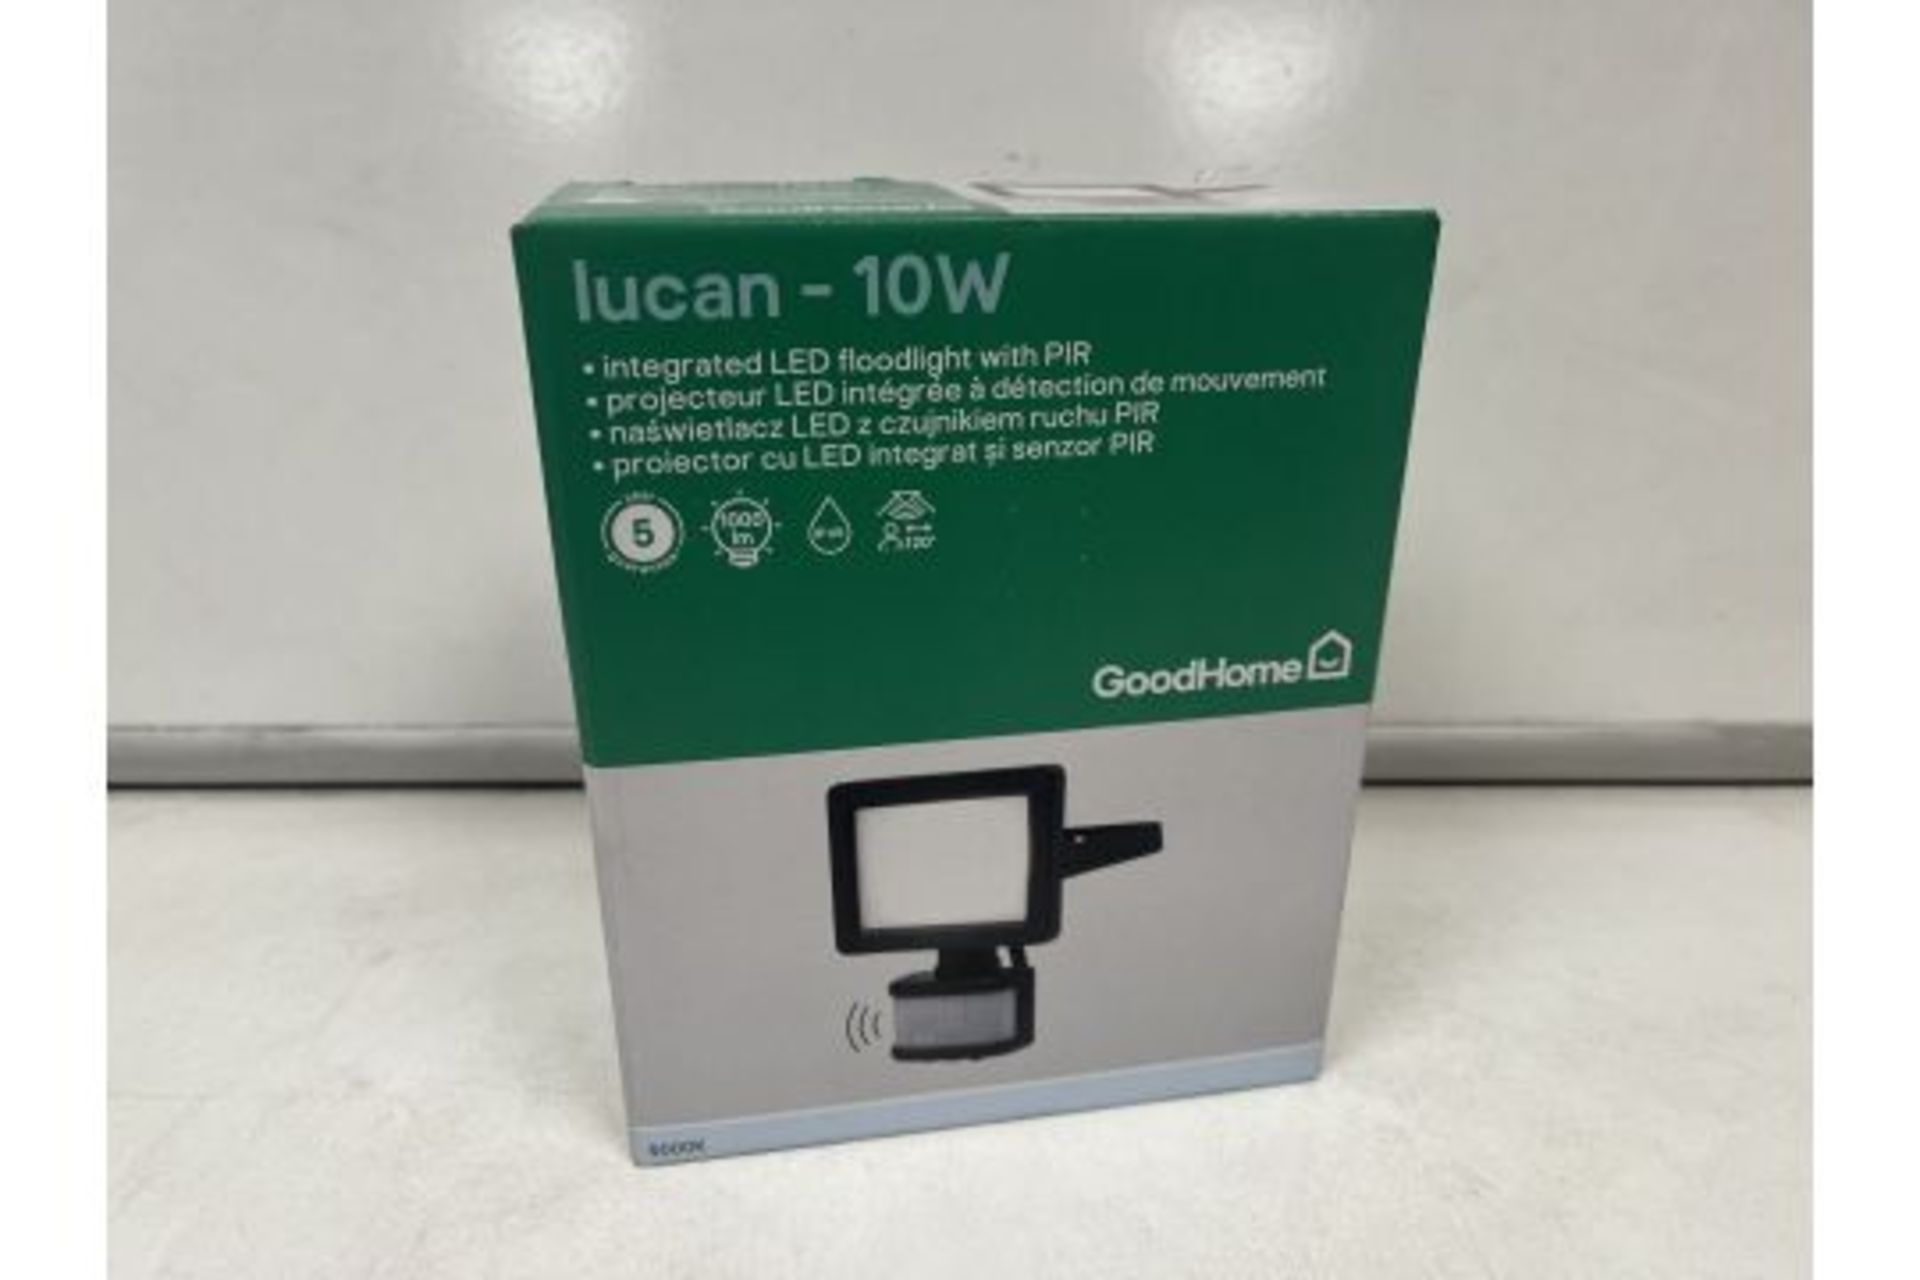 8 X NEW BOXED GOODHOME LUCAN 10W INTEGRATED LED FLOODLIGHT WITH PIR. 1000 LUMENS. ROW5.8RACK